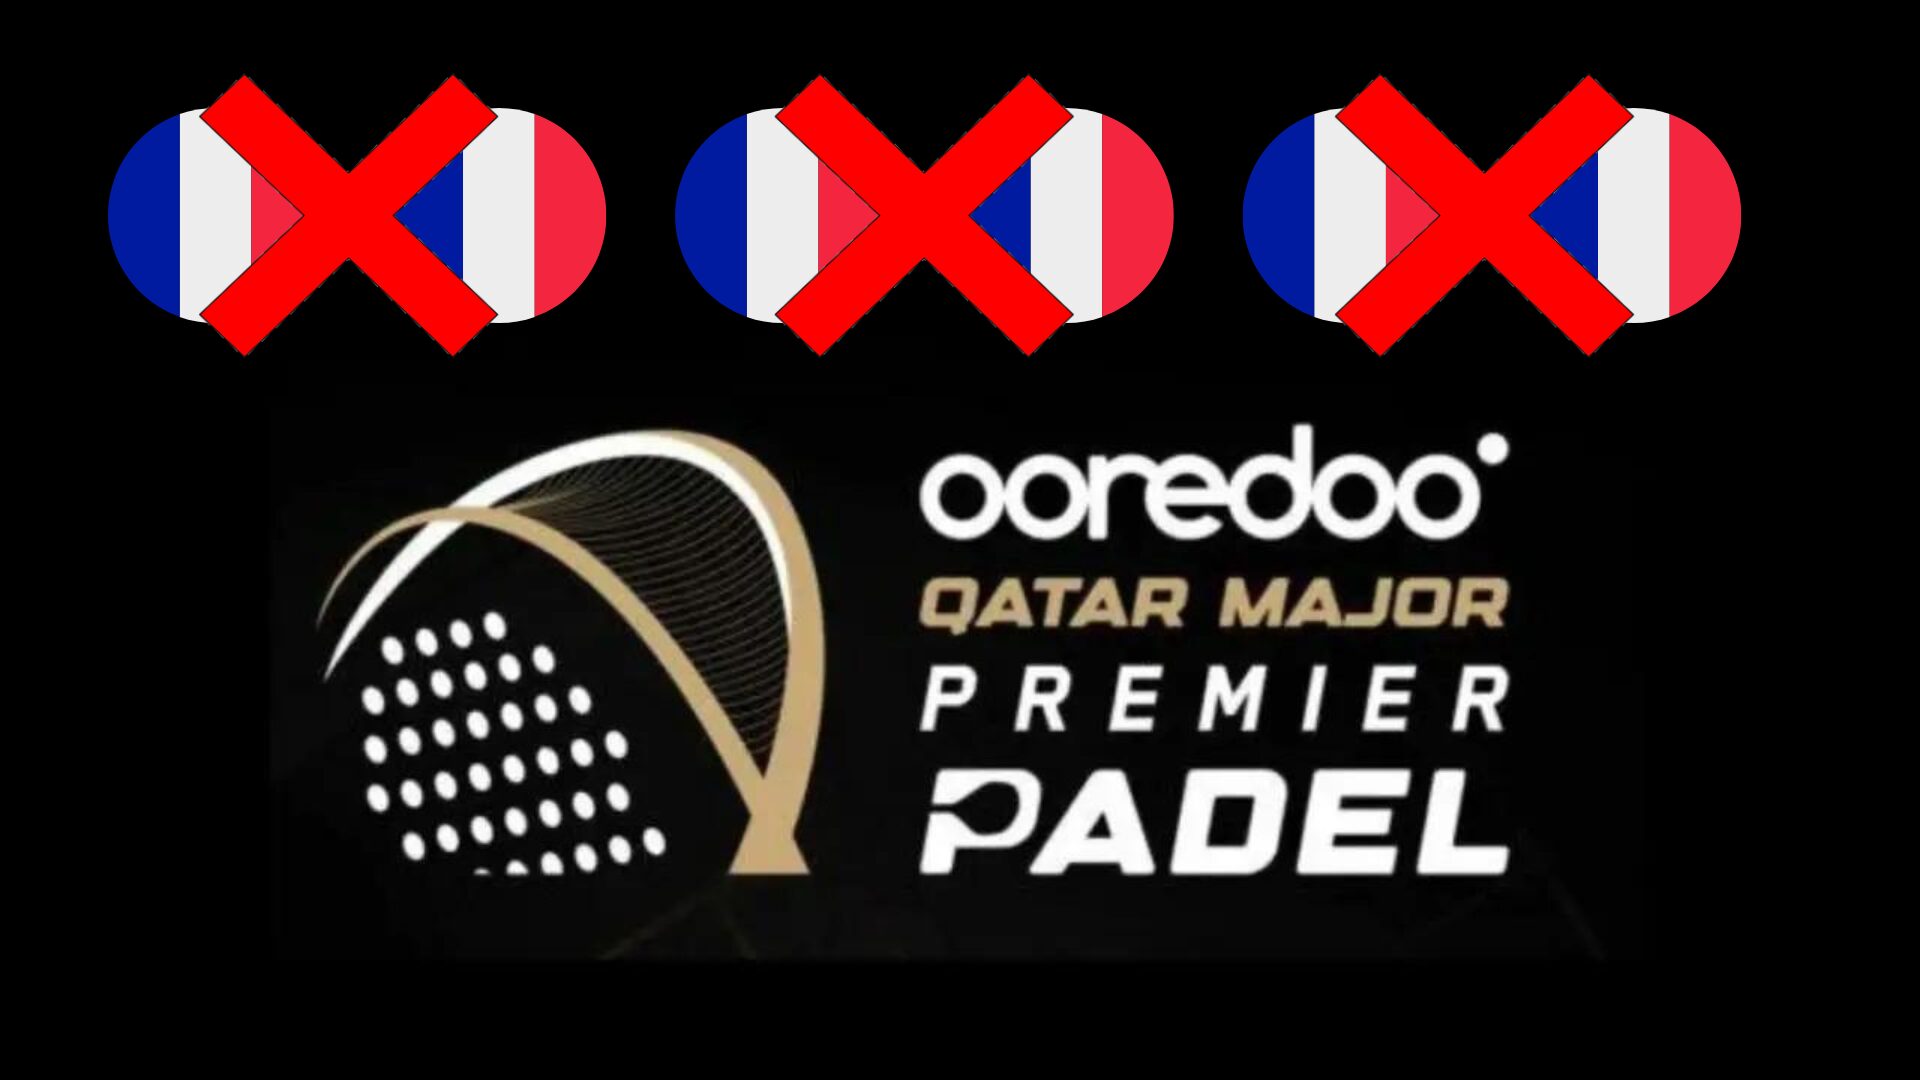 Premier Padel Qatar Major – The French start with three defeats